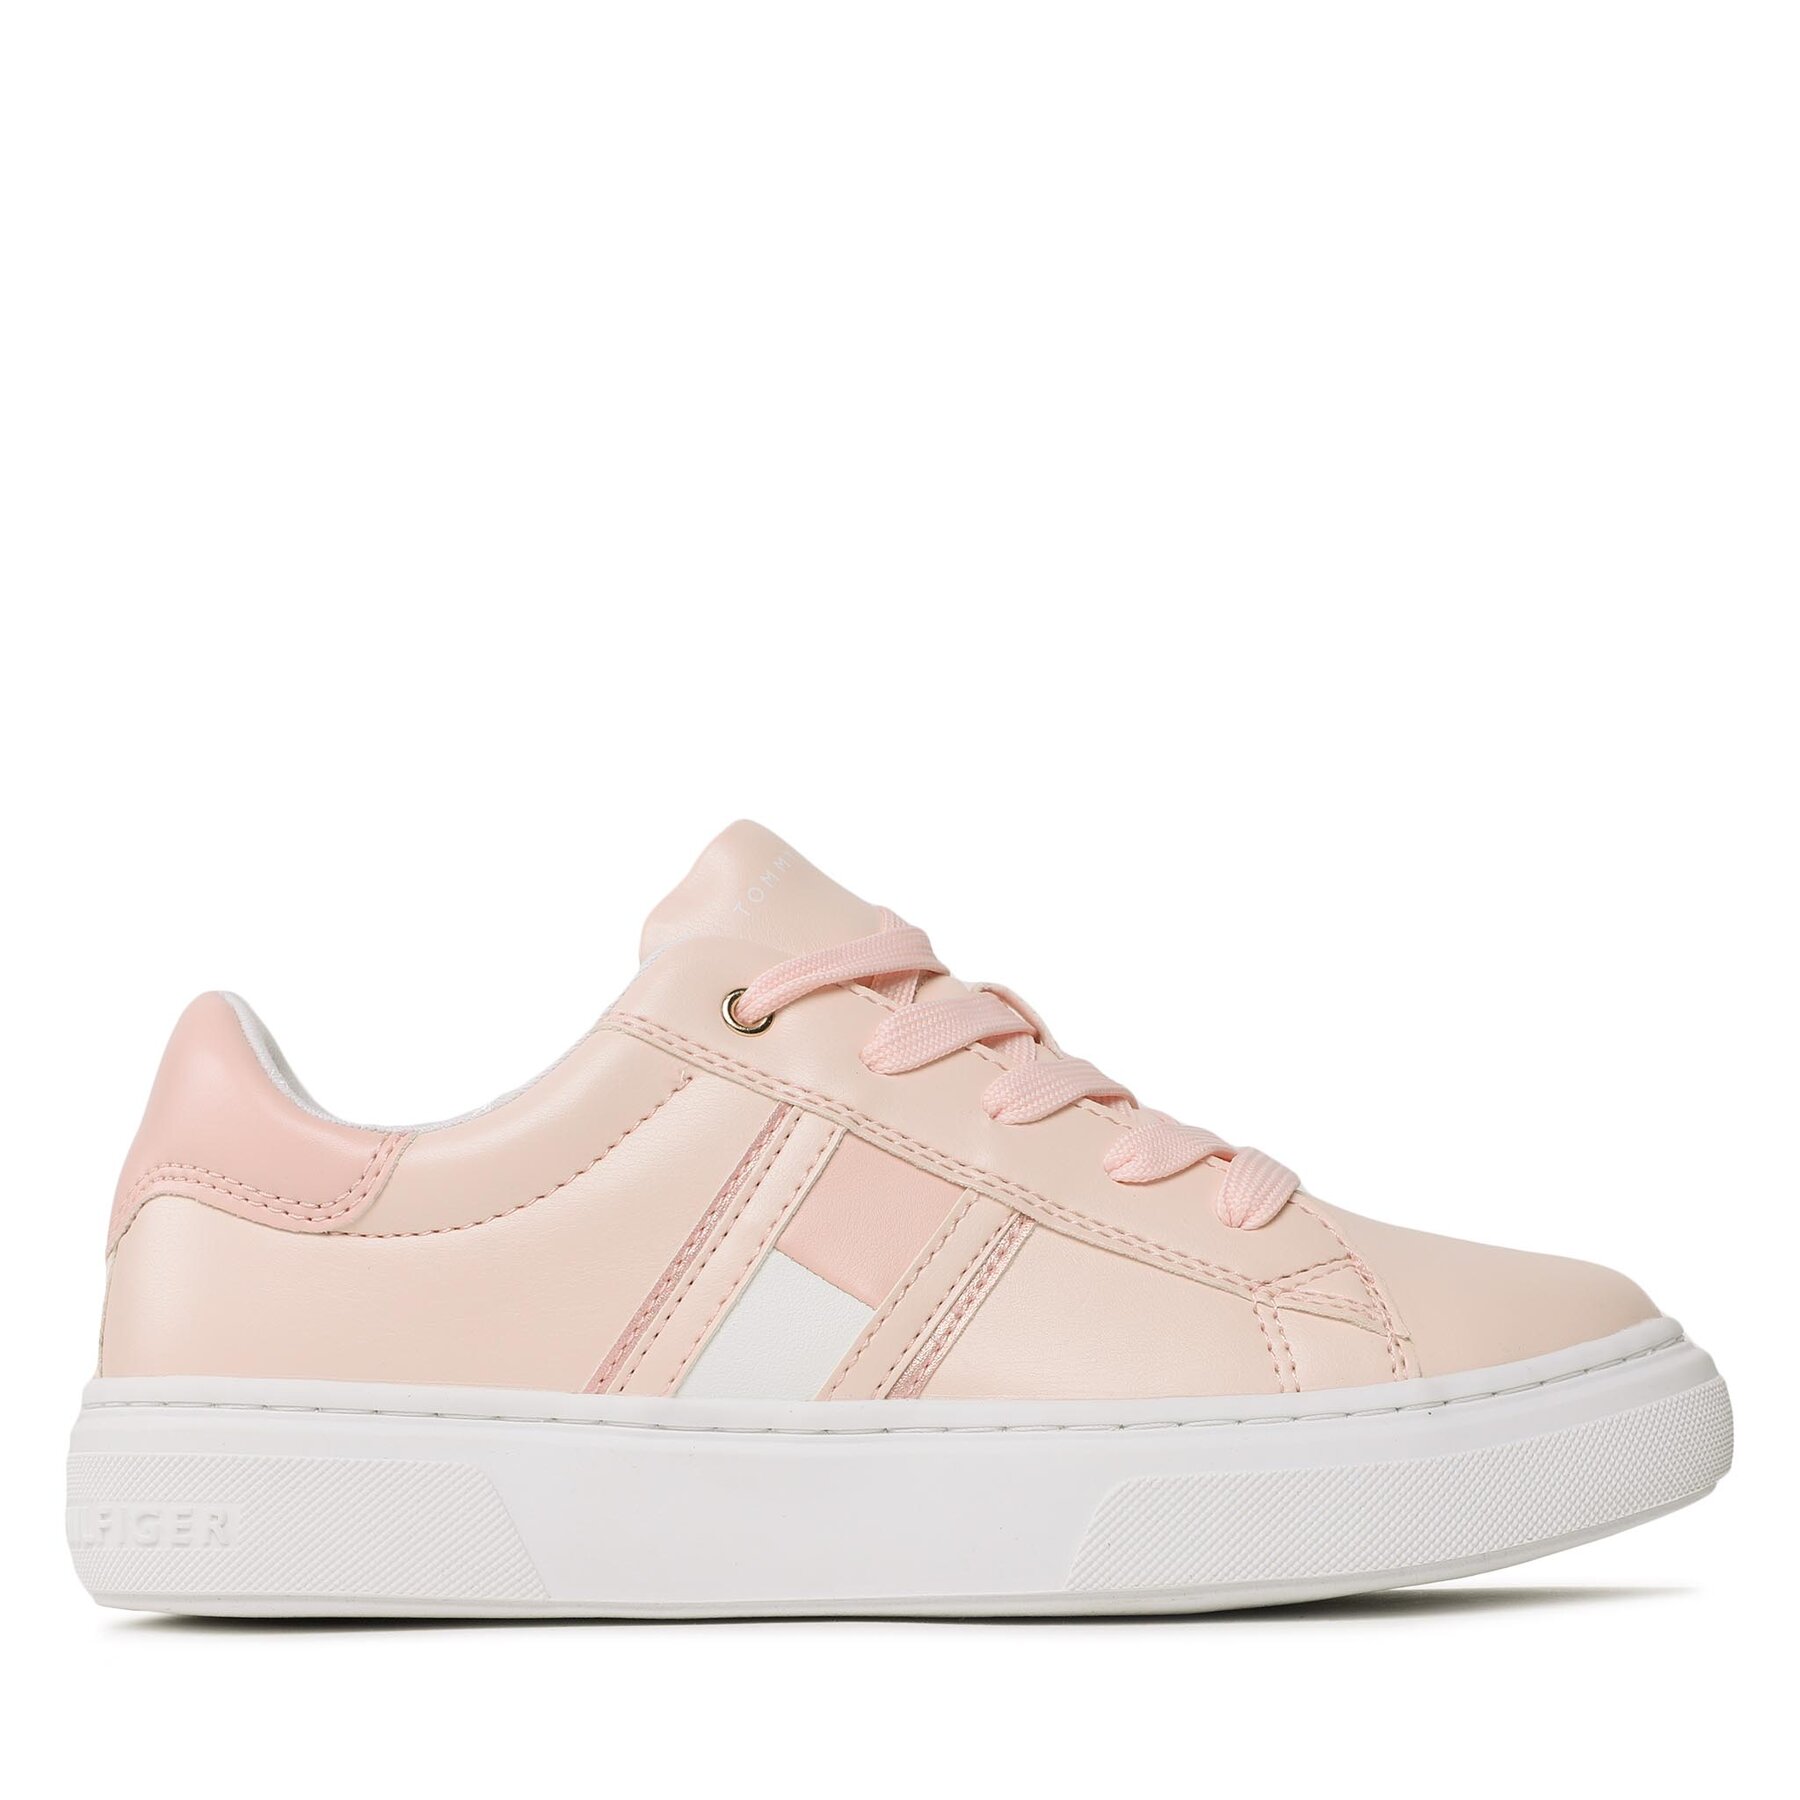 Sneakers Tommy Hilfiger Flag Low Cut Lace-Up Sneaker T3A9-32703-1355 S Pink 302 von Tommy Hilfiger